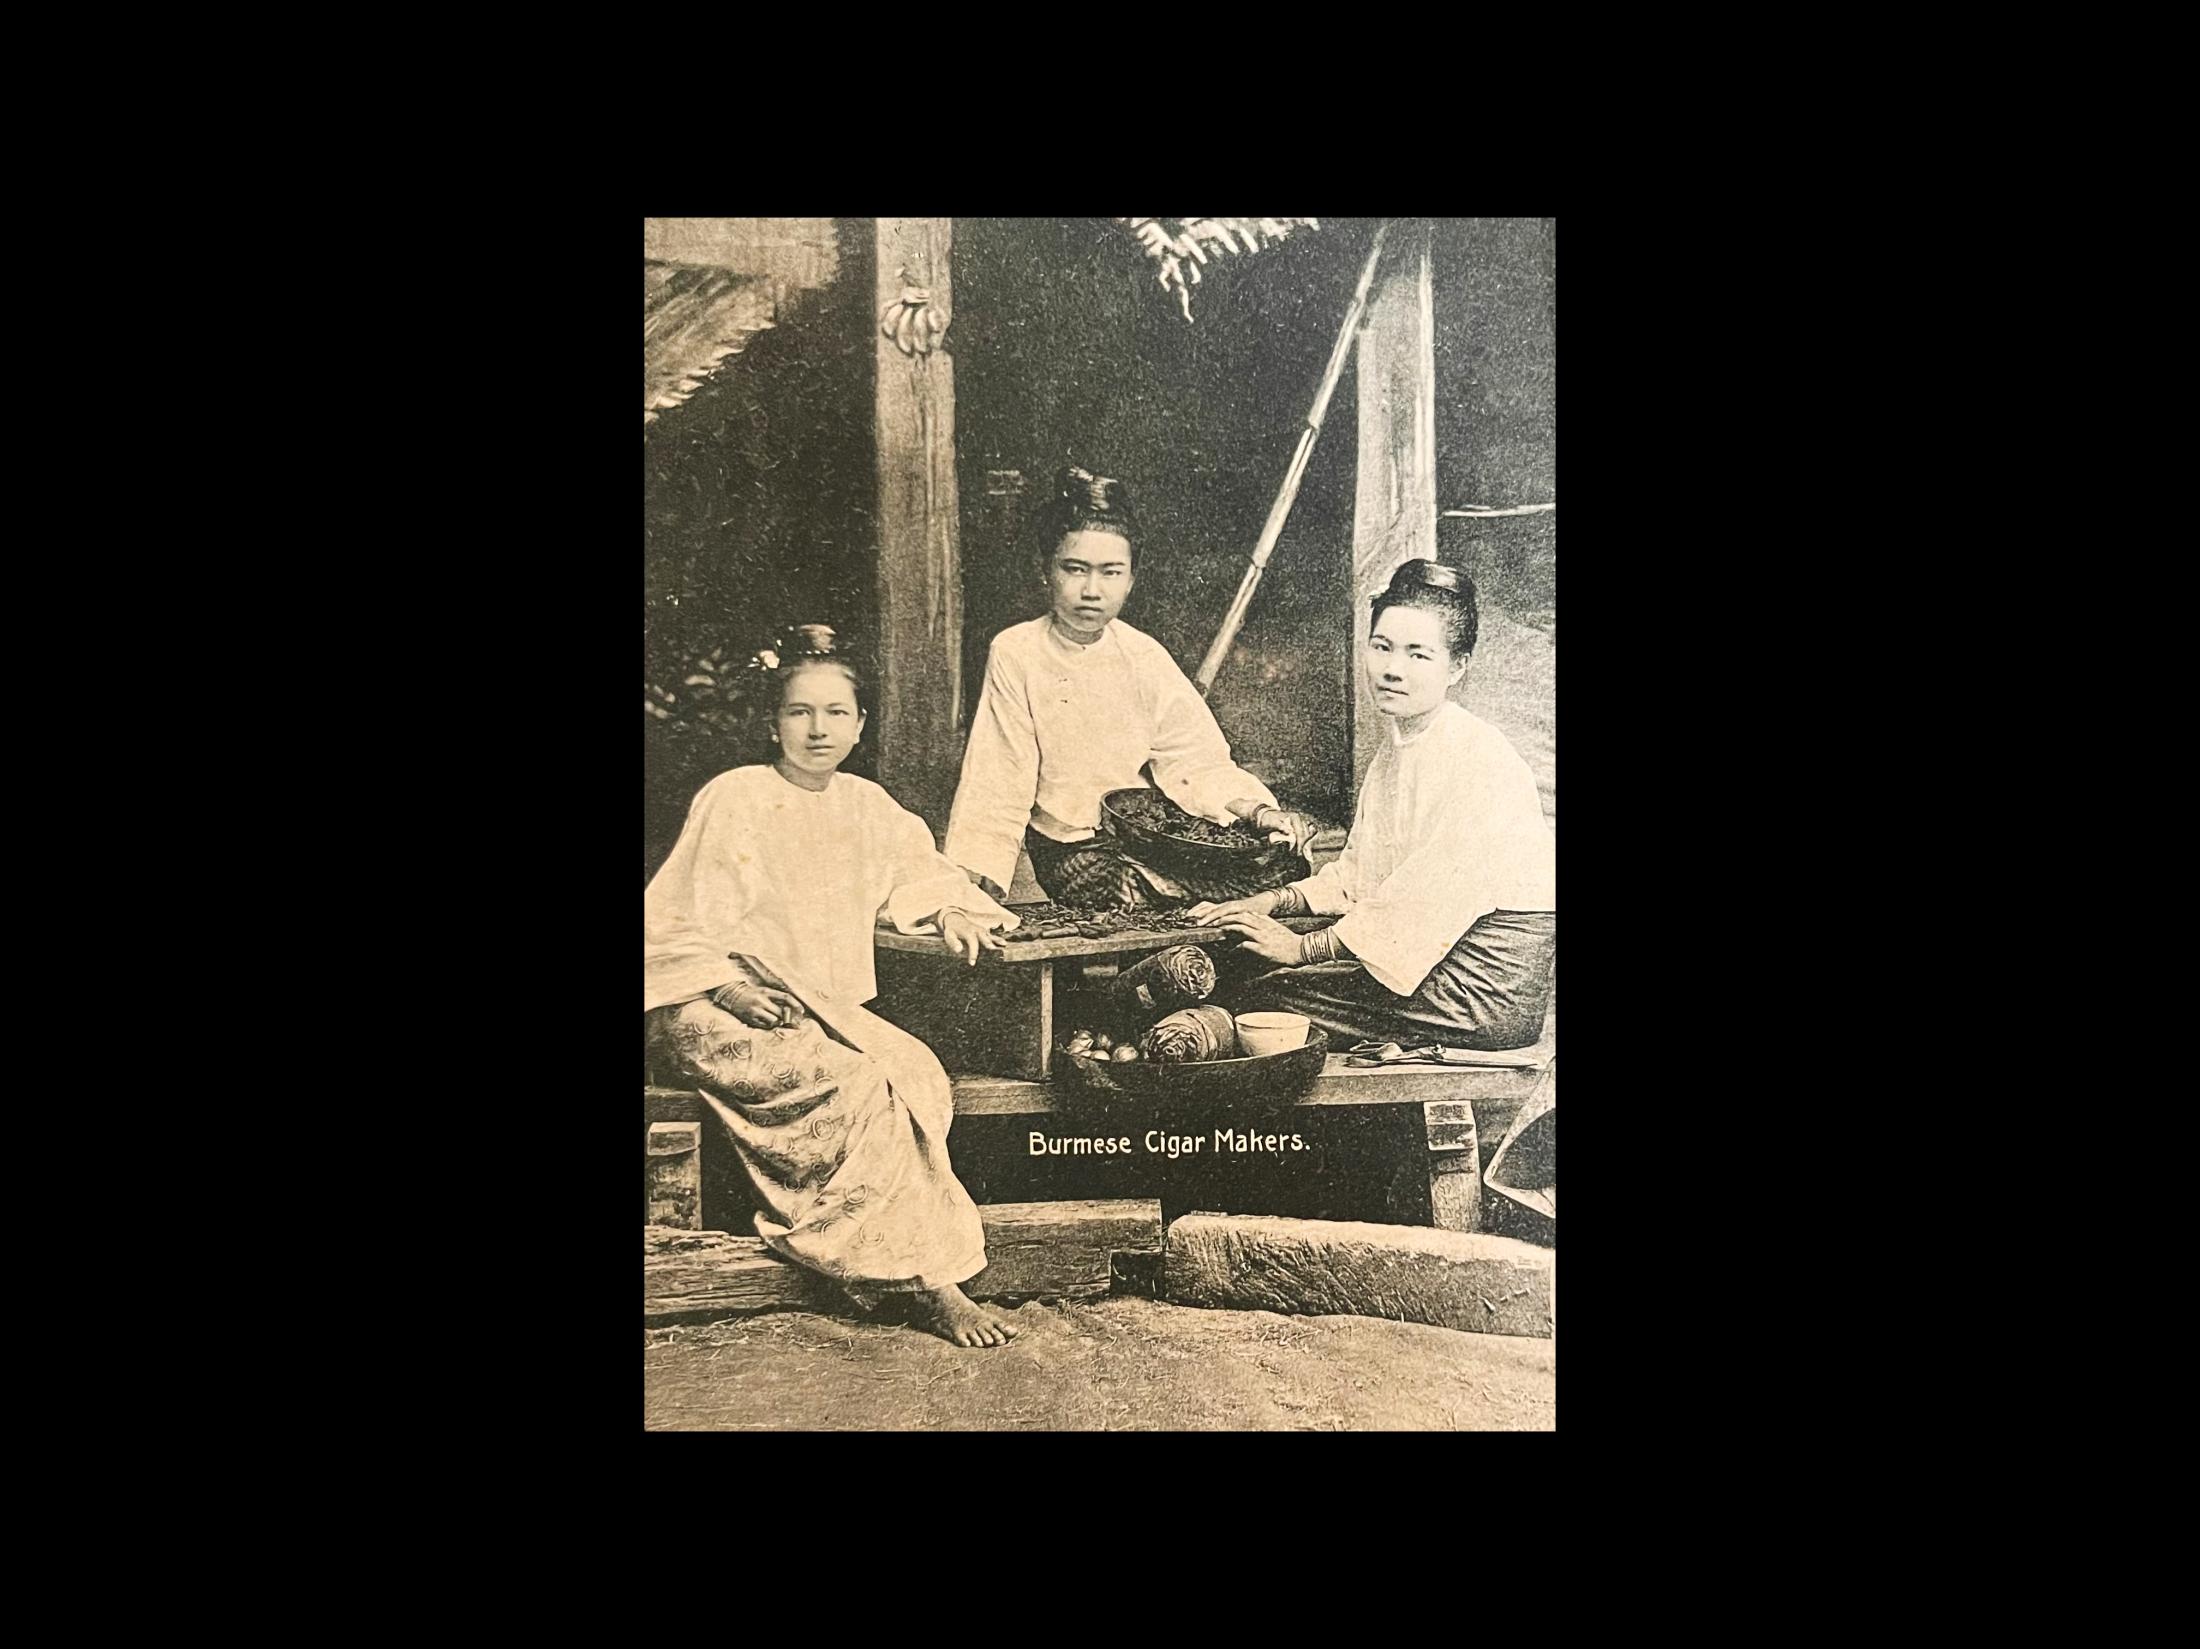 Collection: Burmese Historical Photography - Burmese cigar makers. 1890, attributed to Philip Klier.